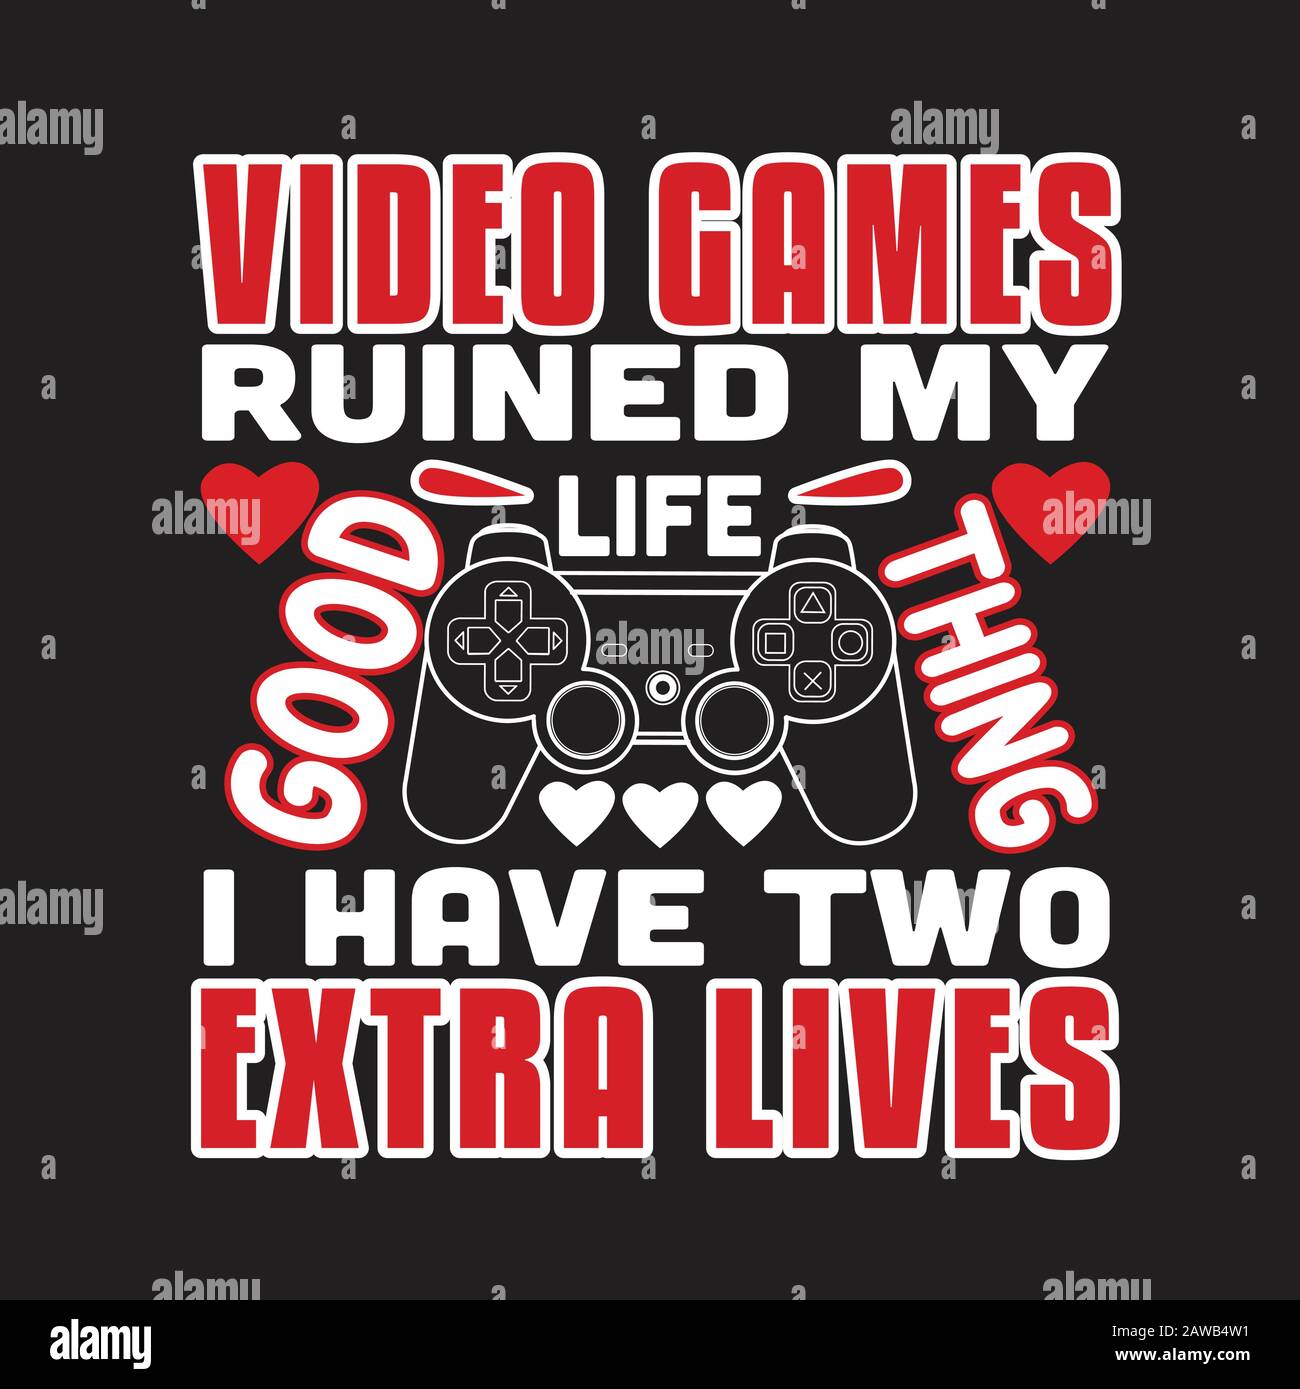 When video games are a part of life